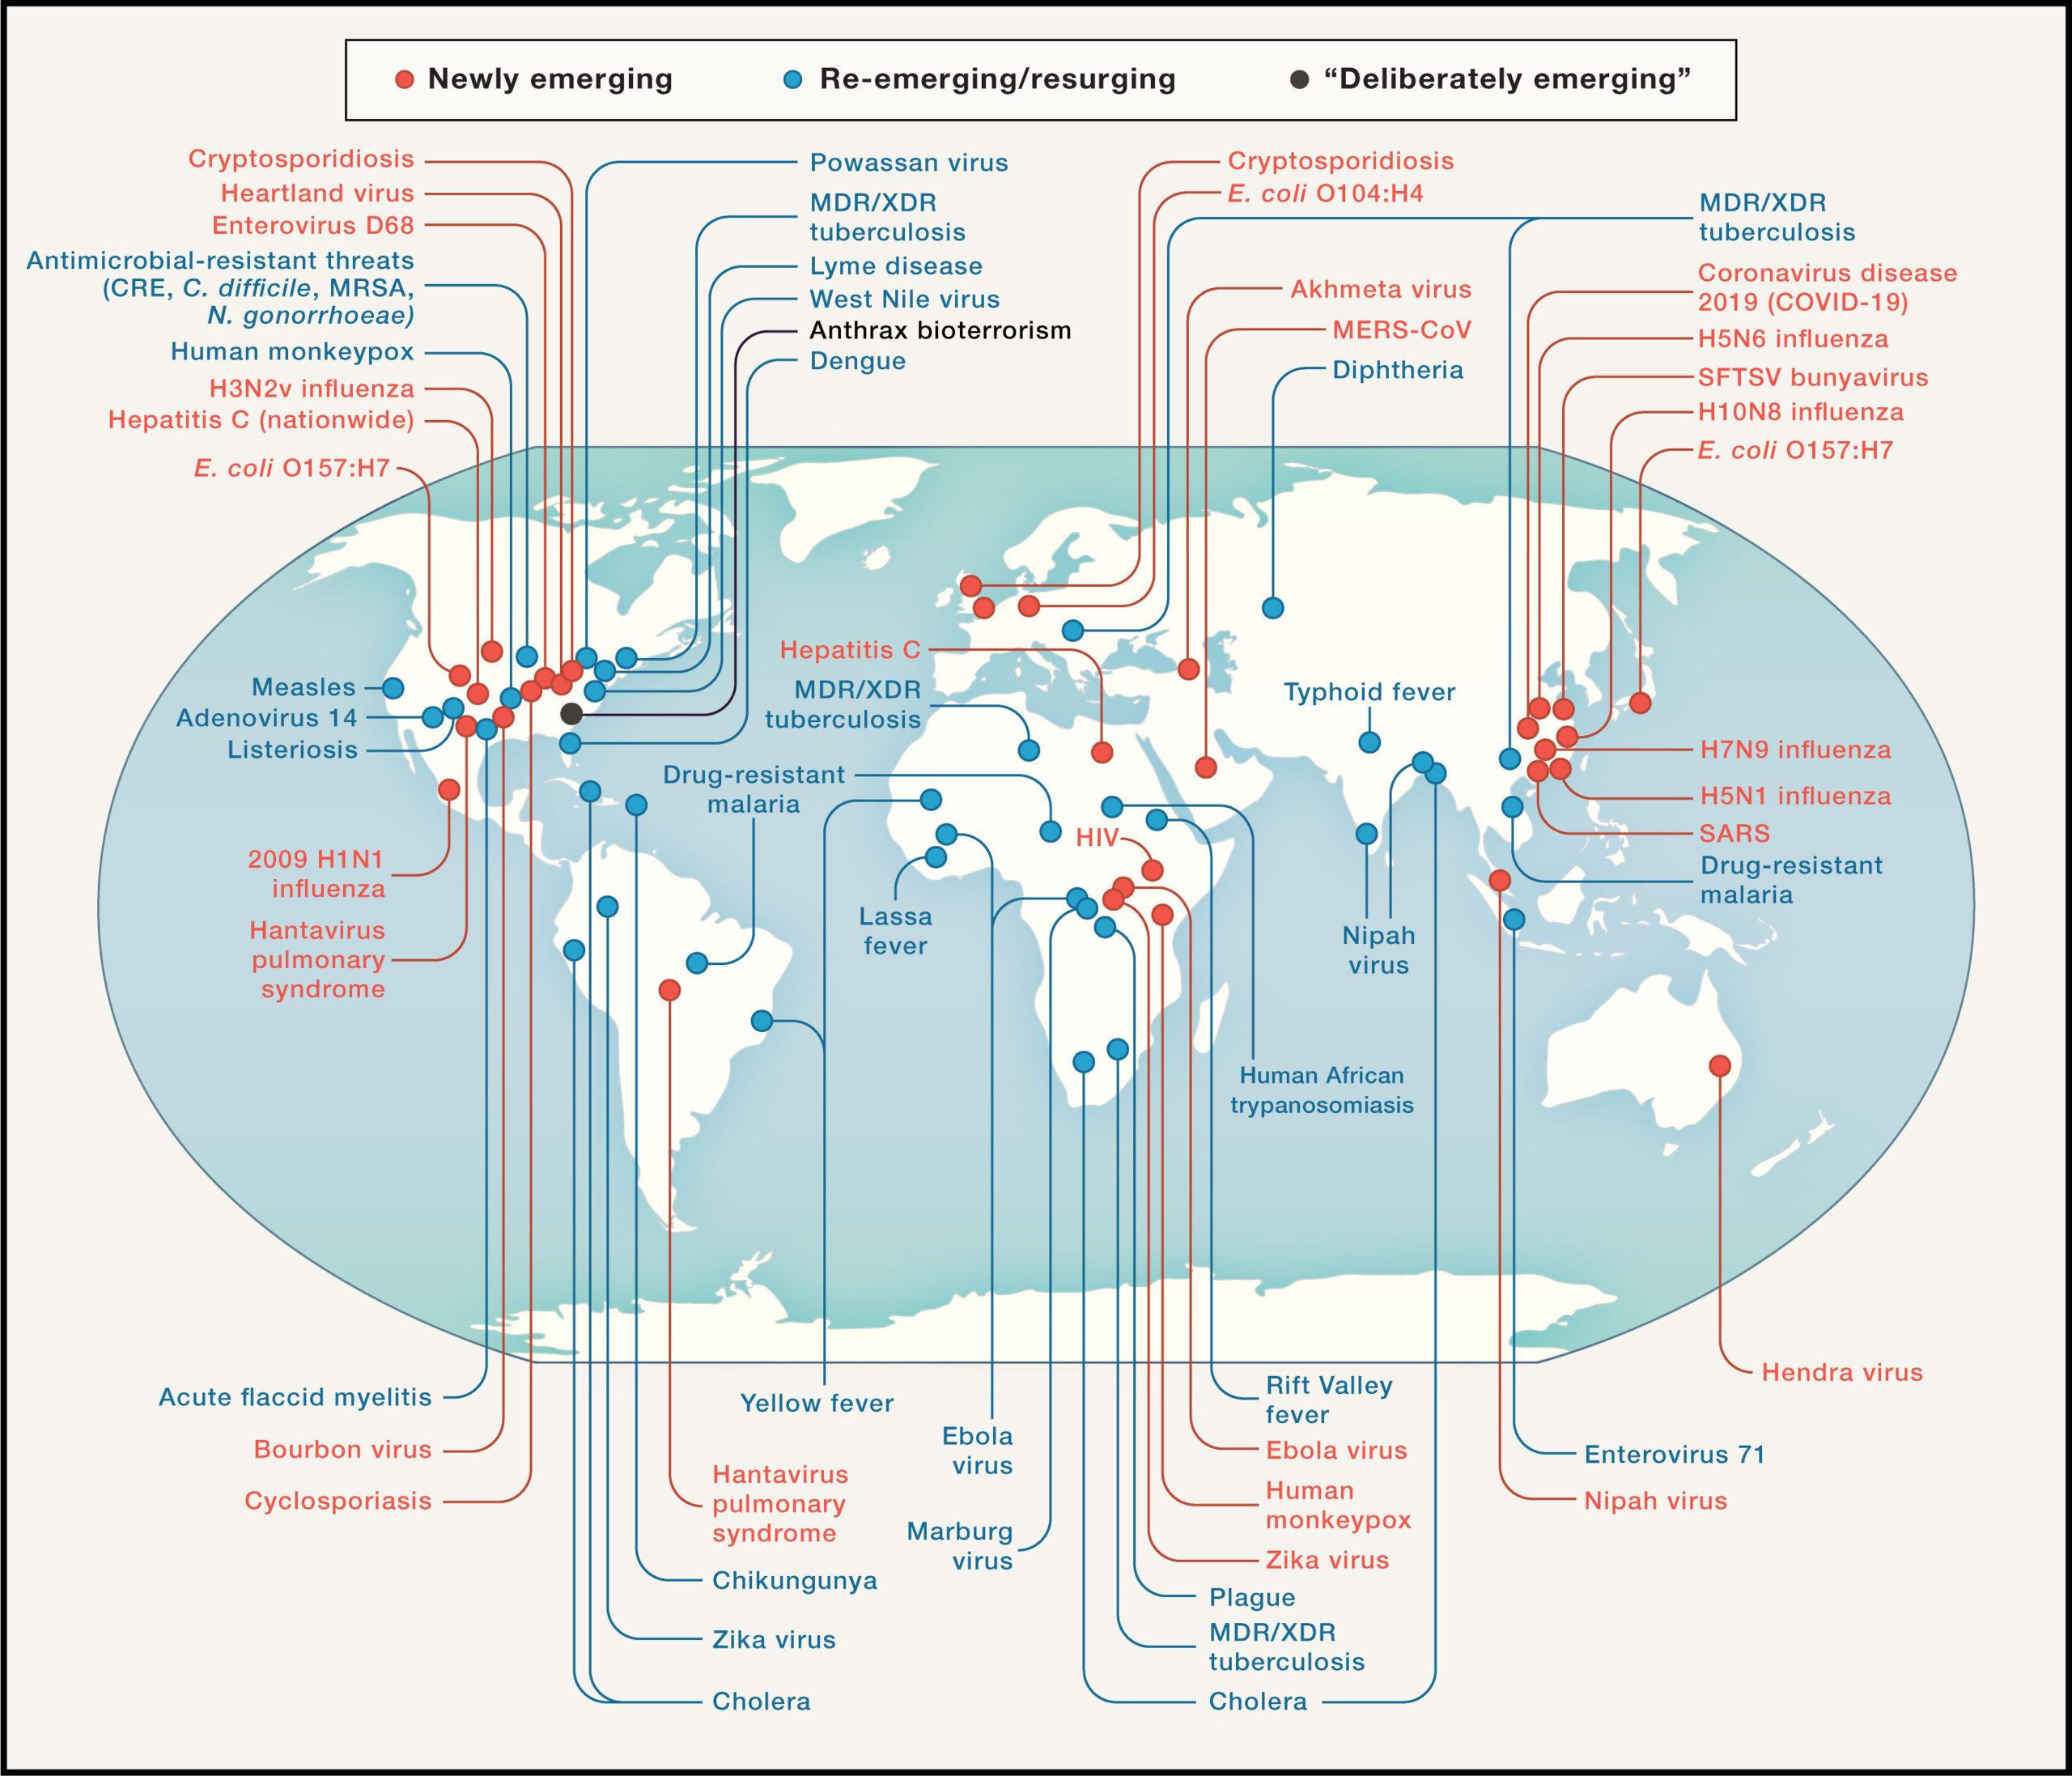 A map showing newly emerging and reemerging infectious diseases that have recently or could someday pose a serious threat to people's health. The dots indicate where they were discovered or are most relevant currently. (Image: Anthony Fauci, David Morens/Cell)